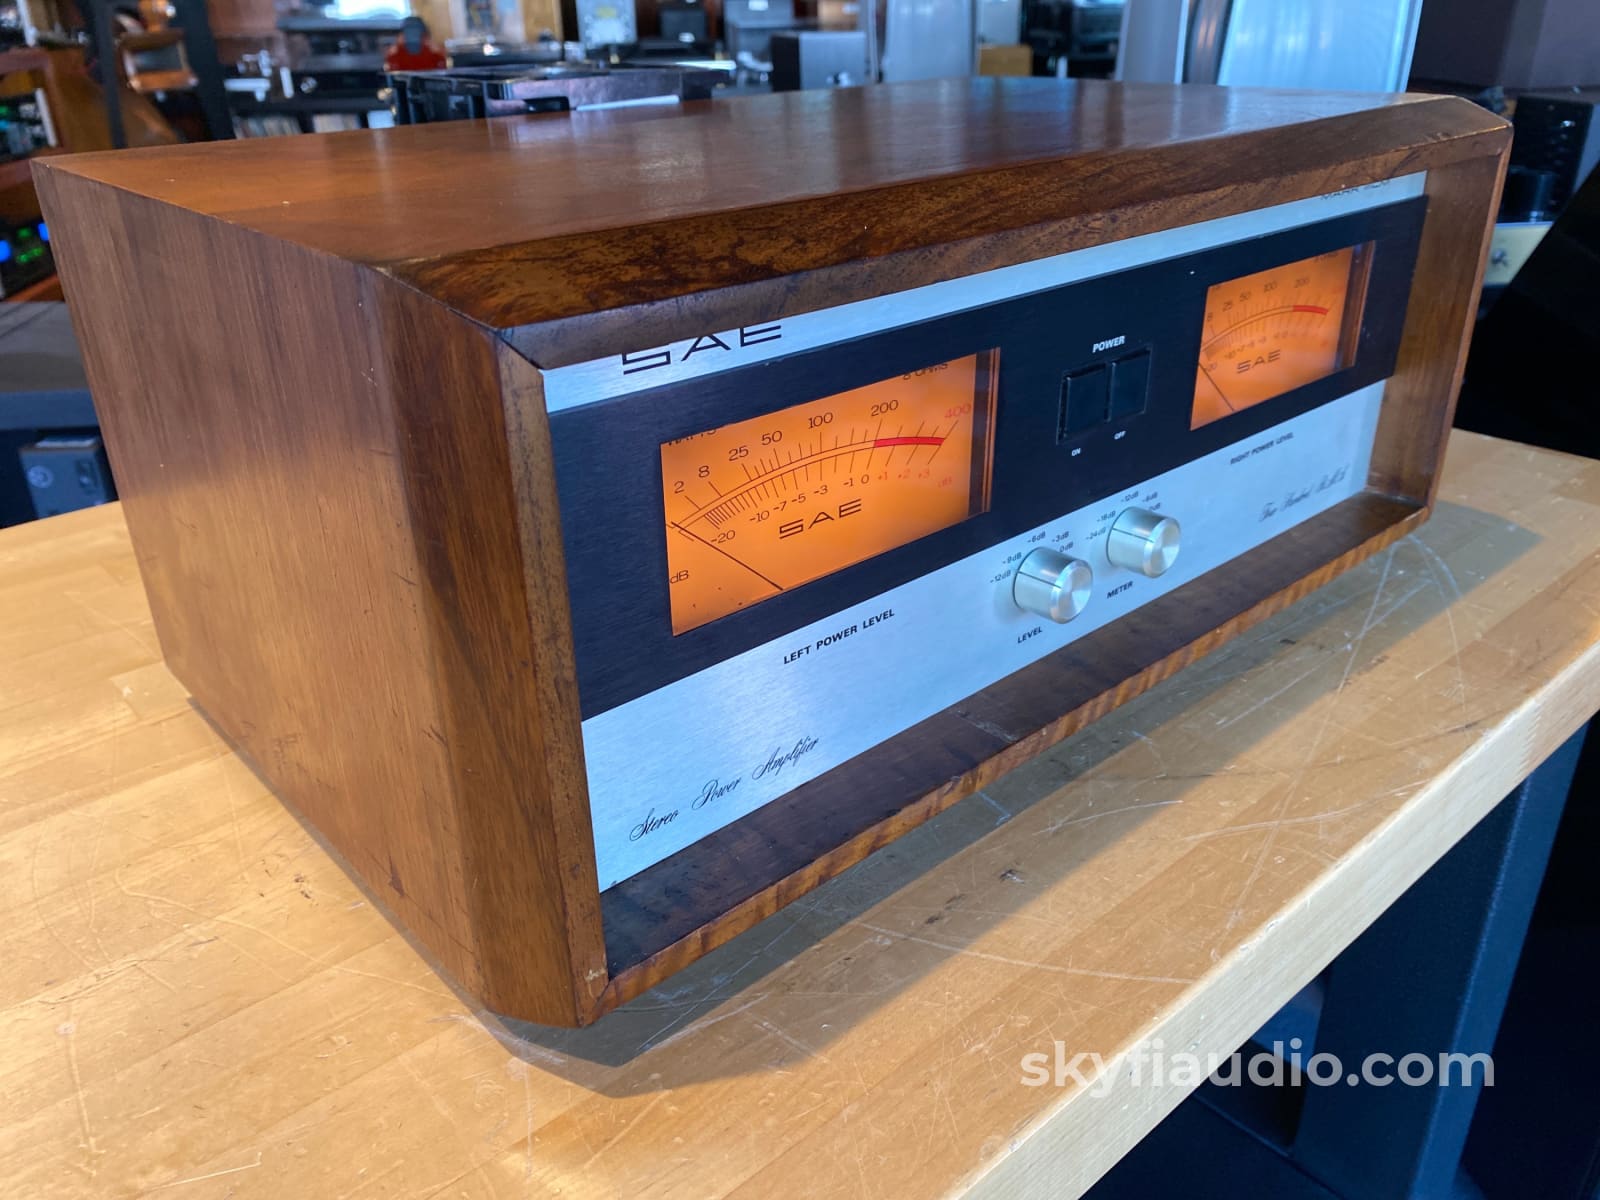 Sae 4 Piece Vintage System In Wood Cabinets - Wow!